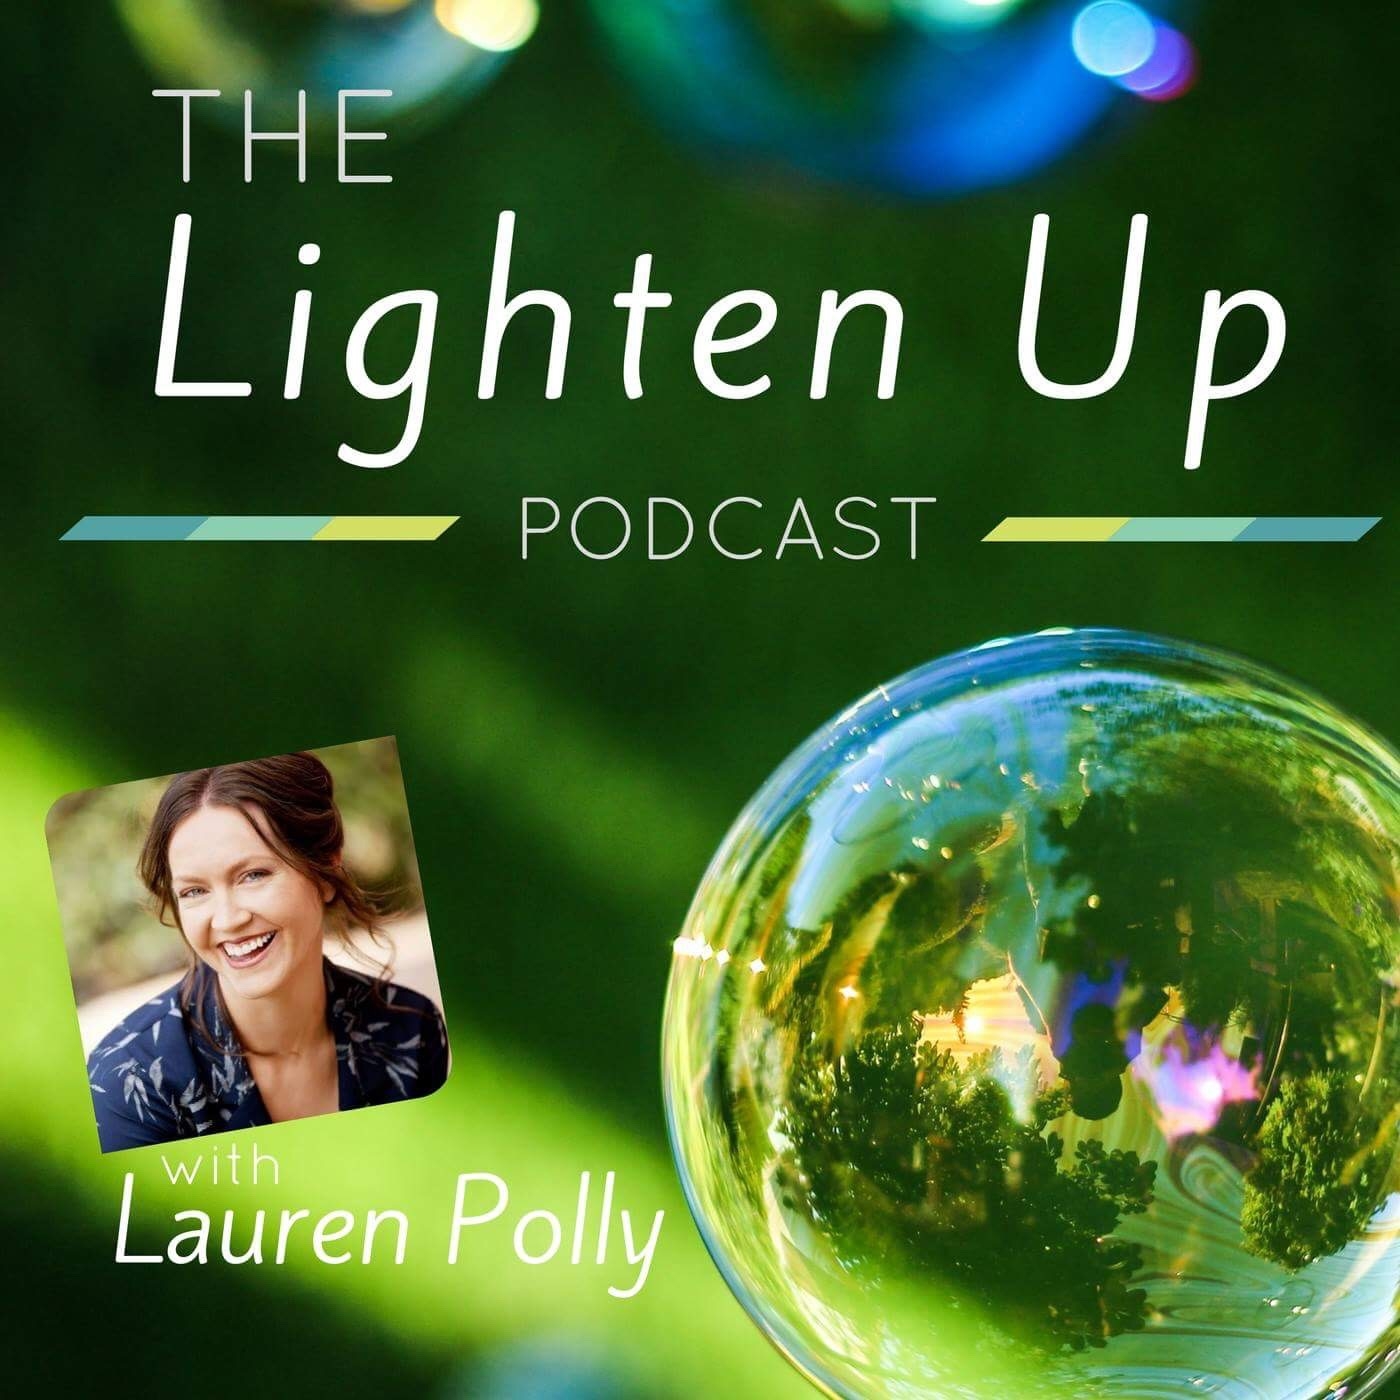 Lauren Polly ”The Lighten Up Podcast Launch Day” on The Erica Glessing Show Podcast #2092